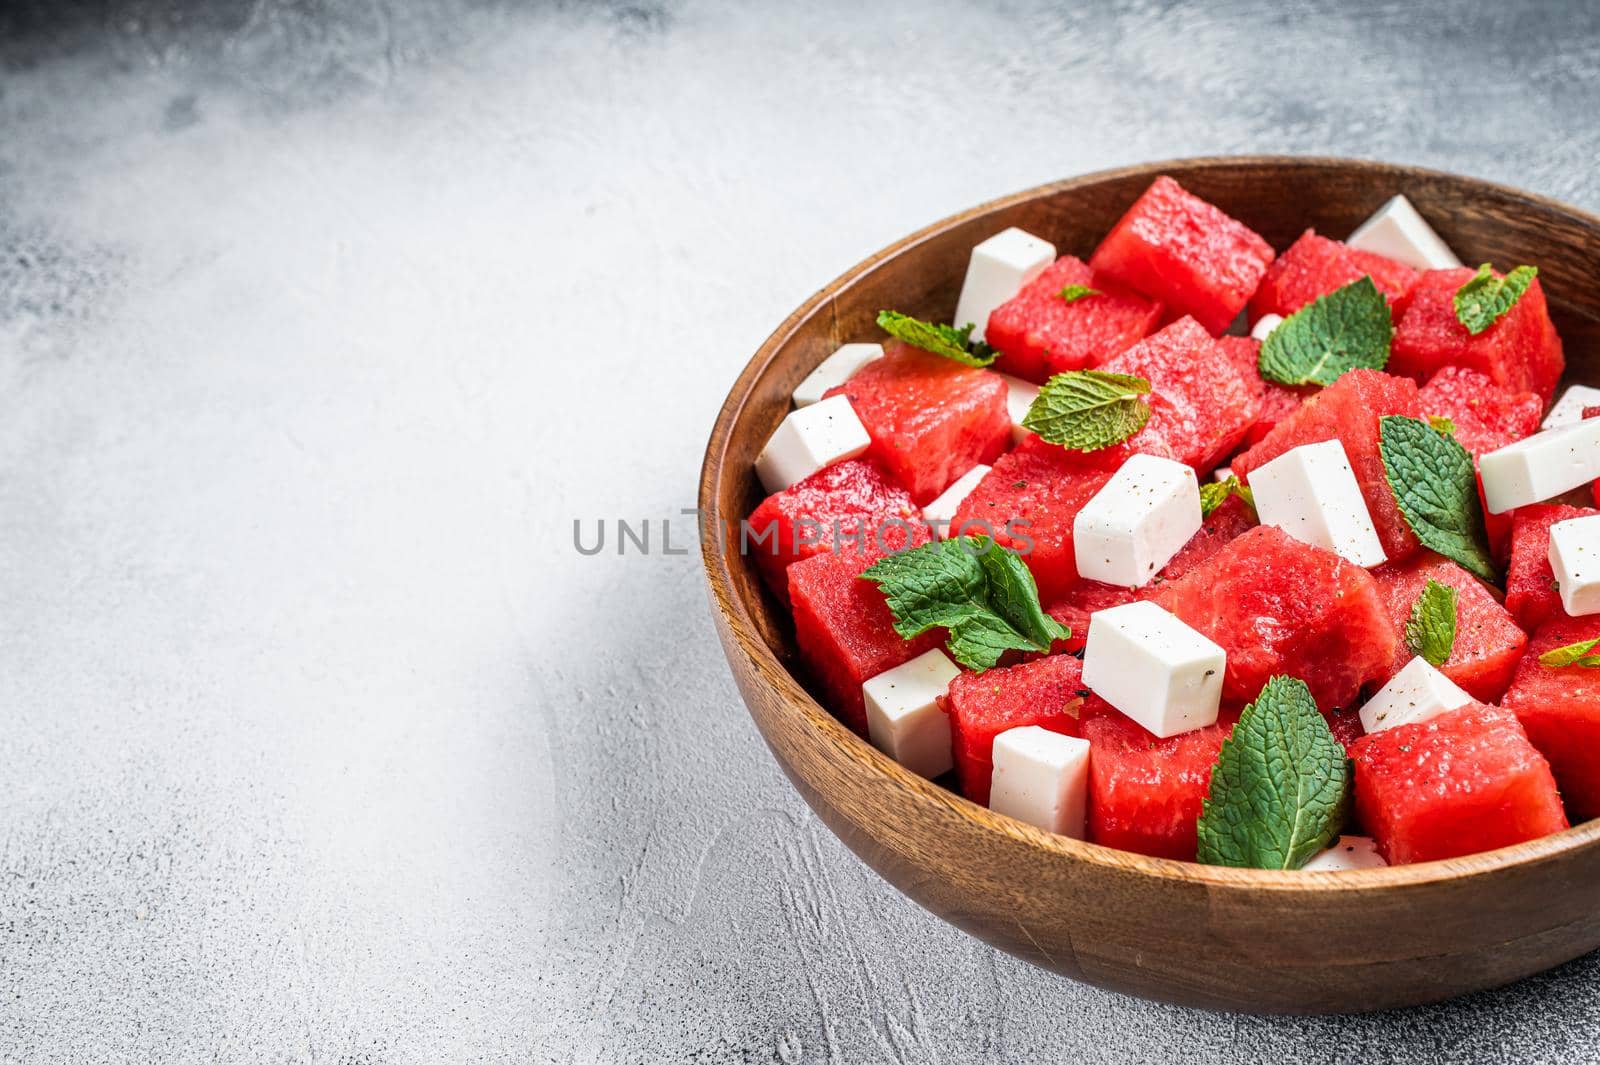 Watermelon Salad with feta cheese in a wooden plate. White background. Top view. Copy space.